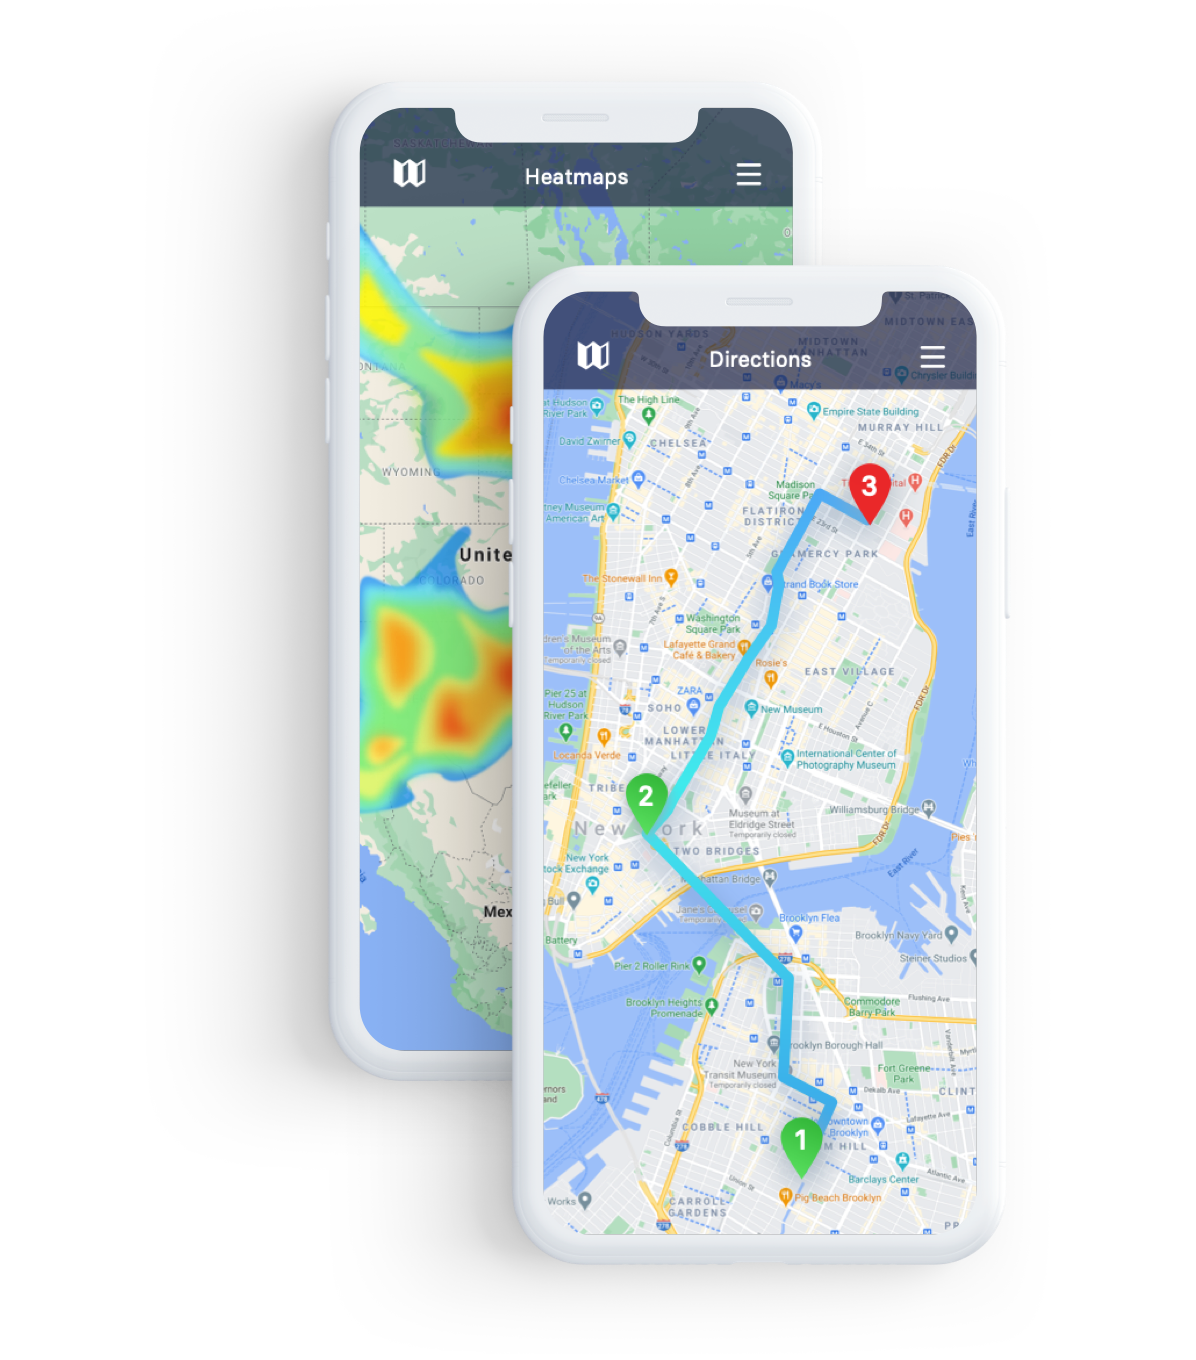 Why Maptive Mobile 